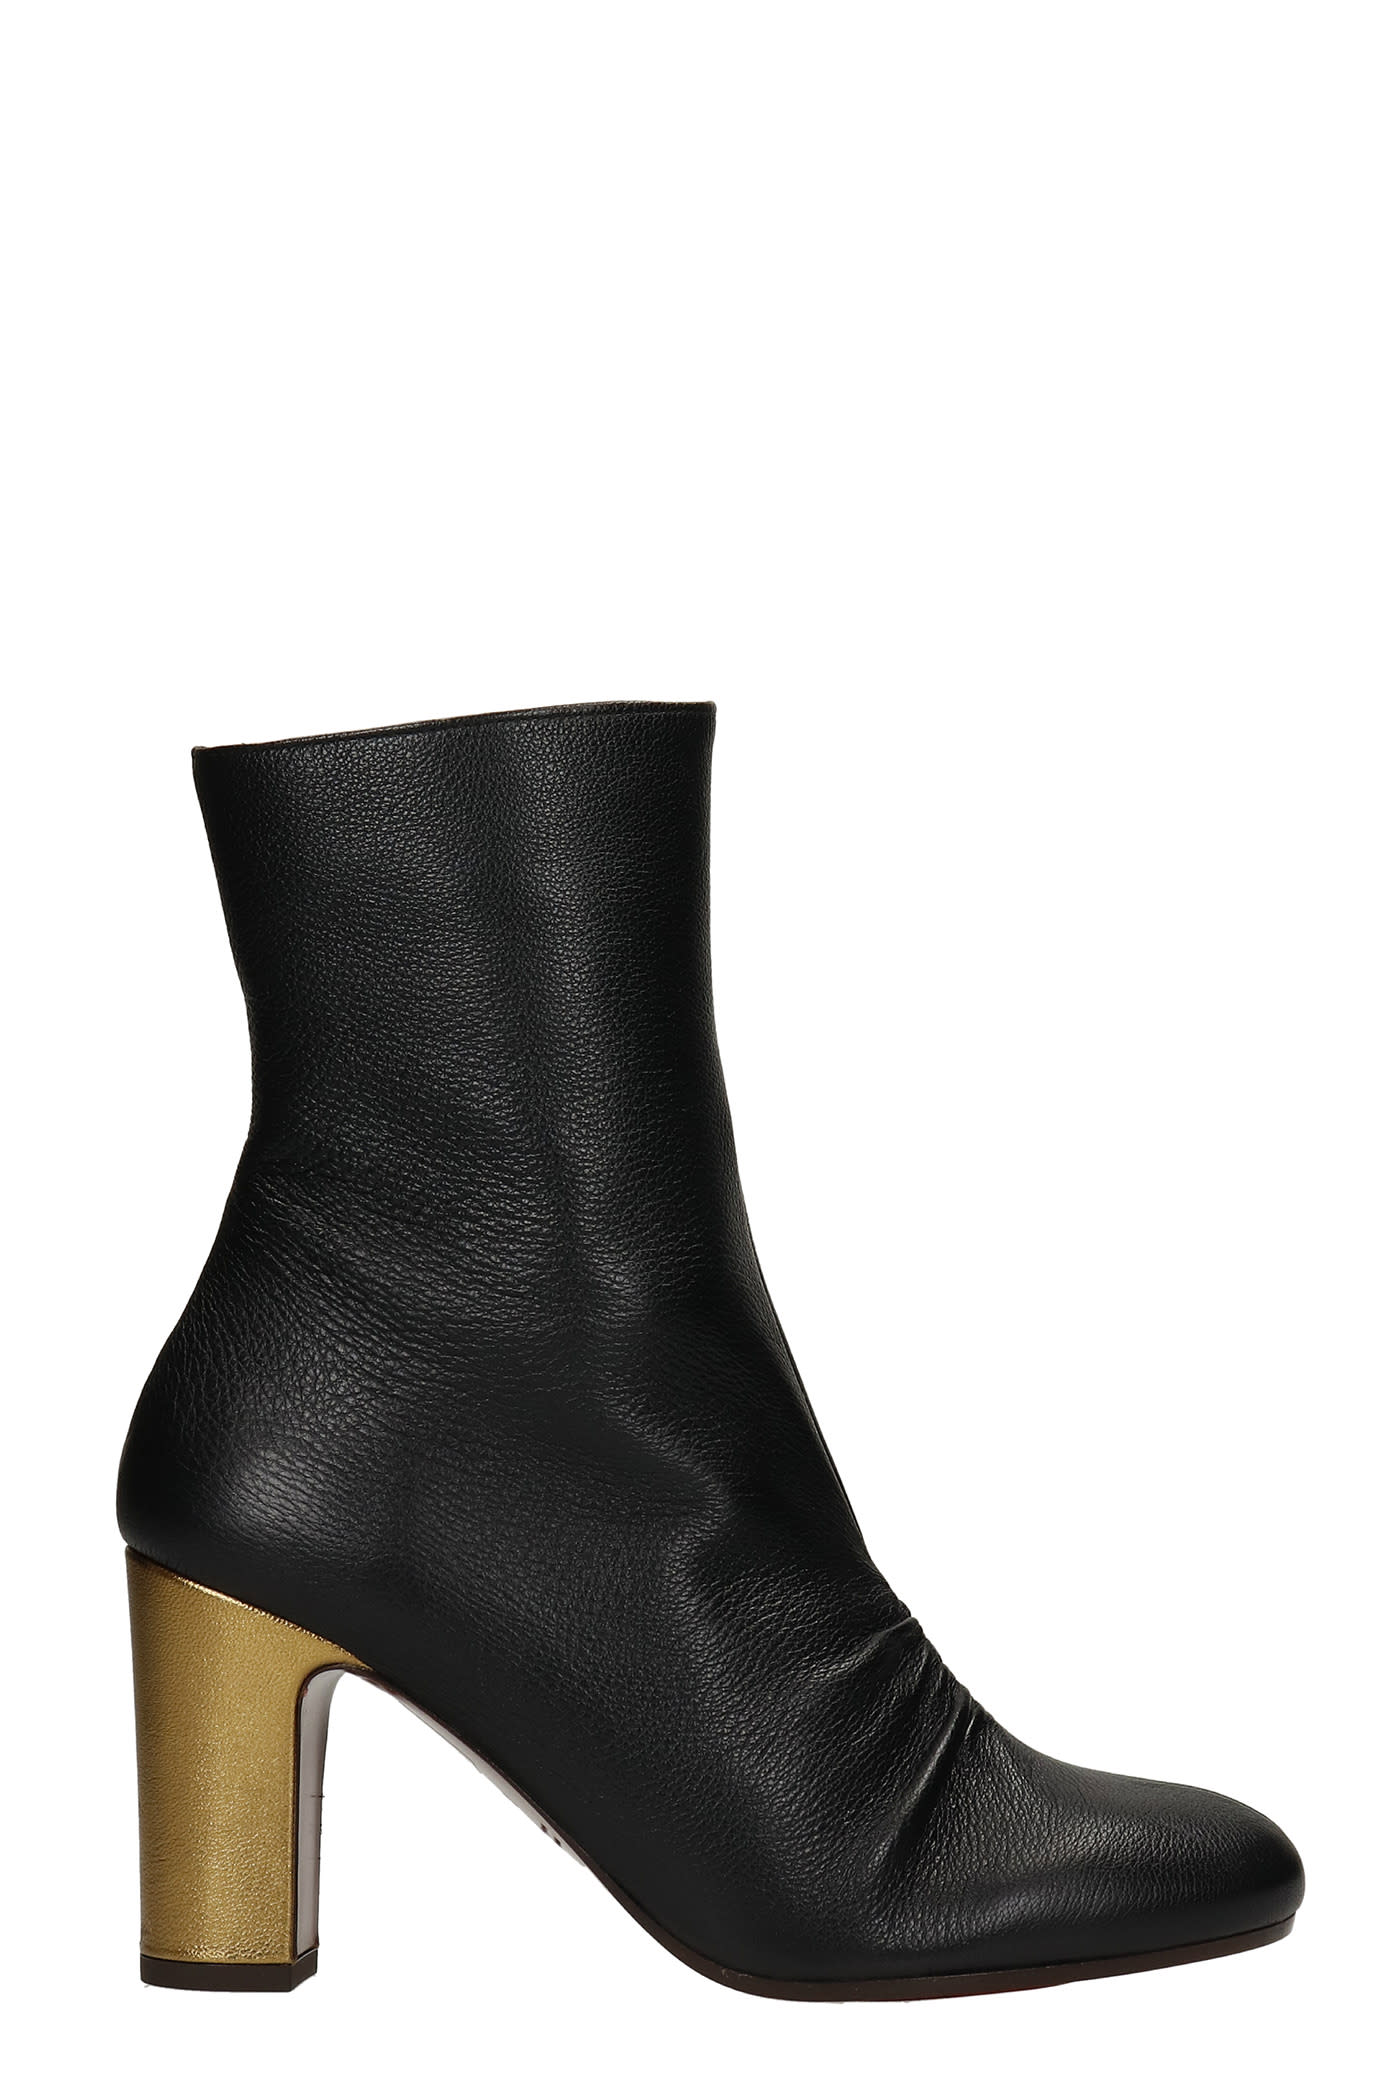 Chie Mihara Waura High Heels Ankle Boots In Black Leather | ModeSens